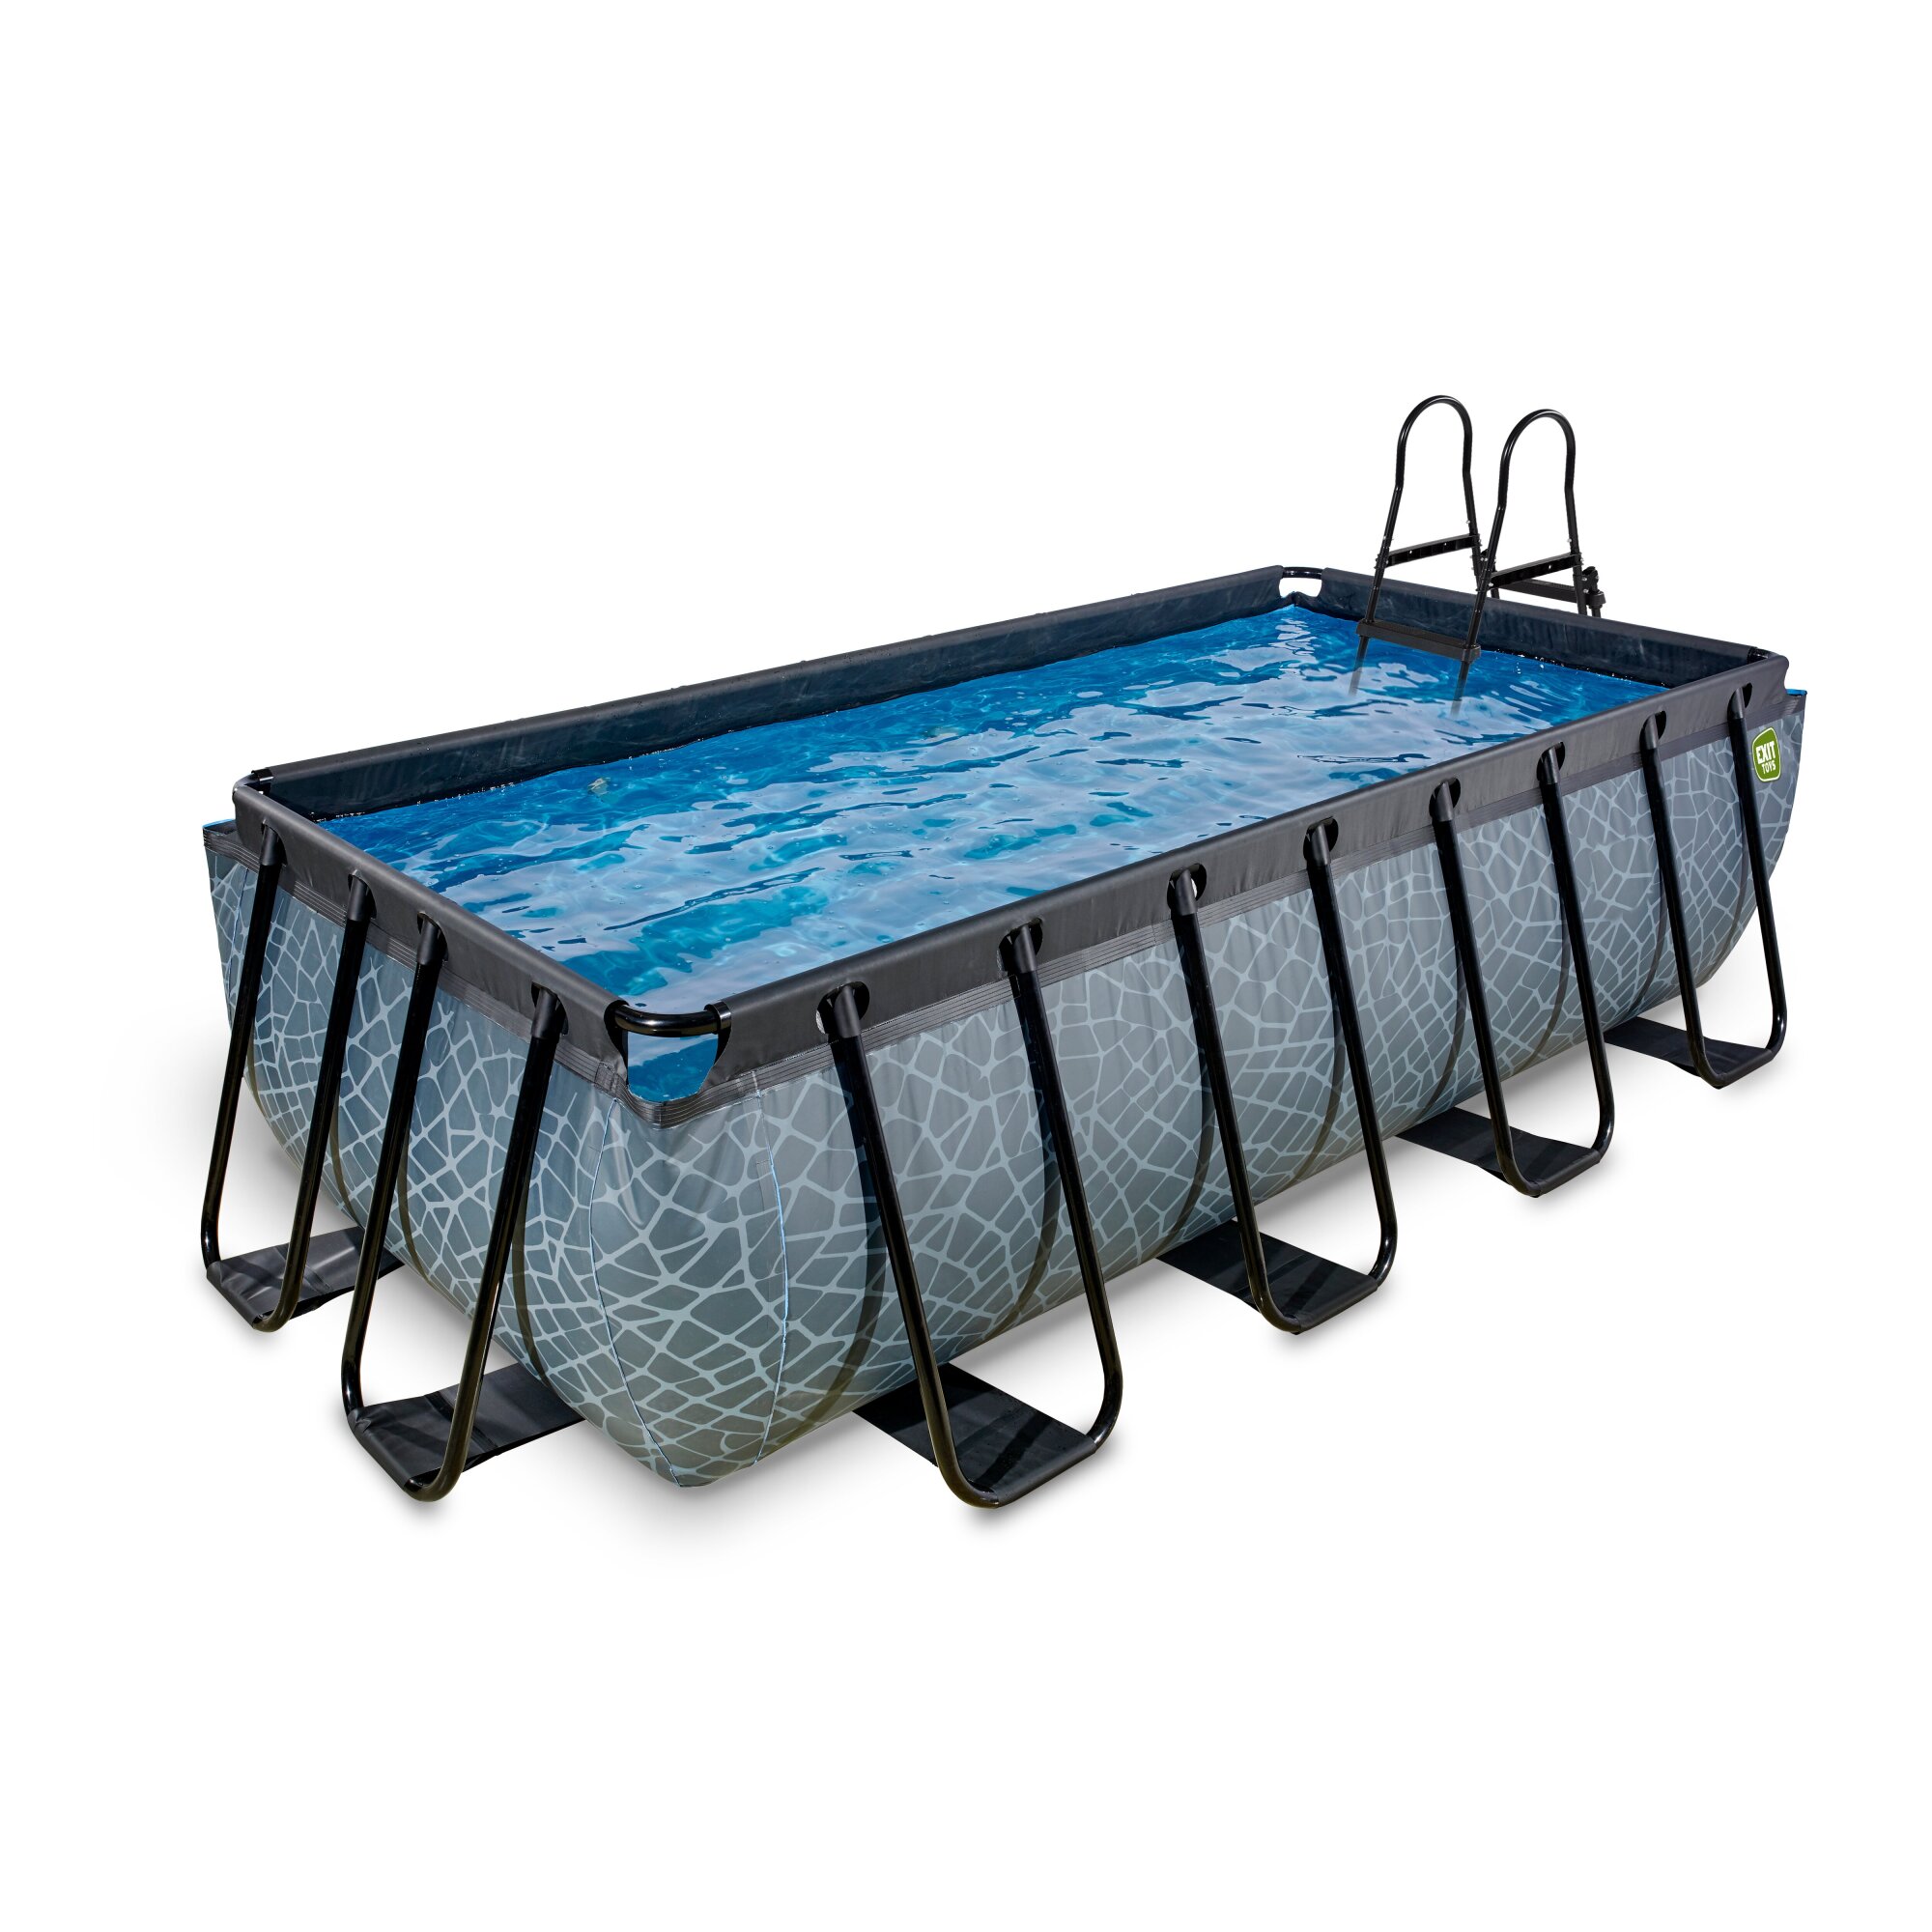 EXIT Stone pool 400x200x100cm with filter pump - grey